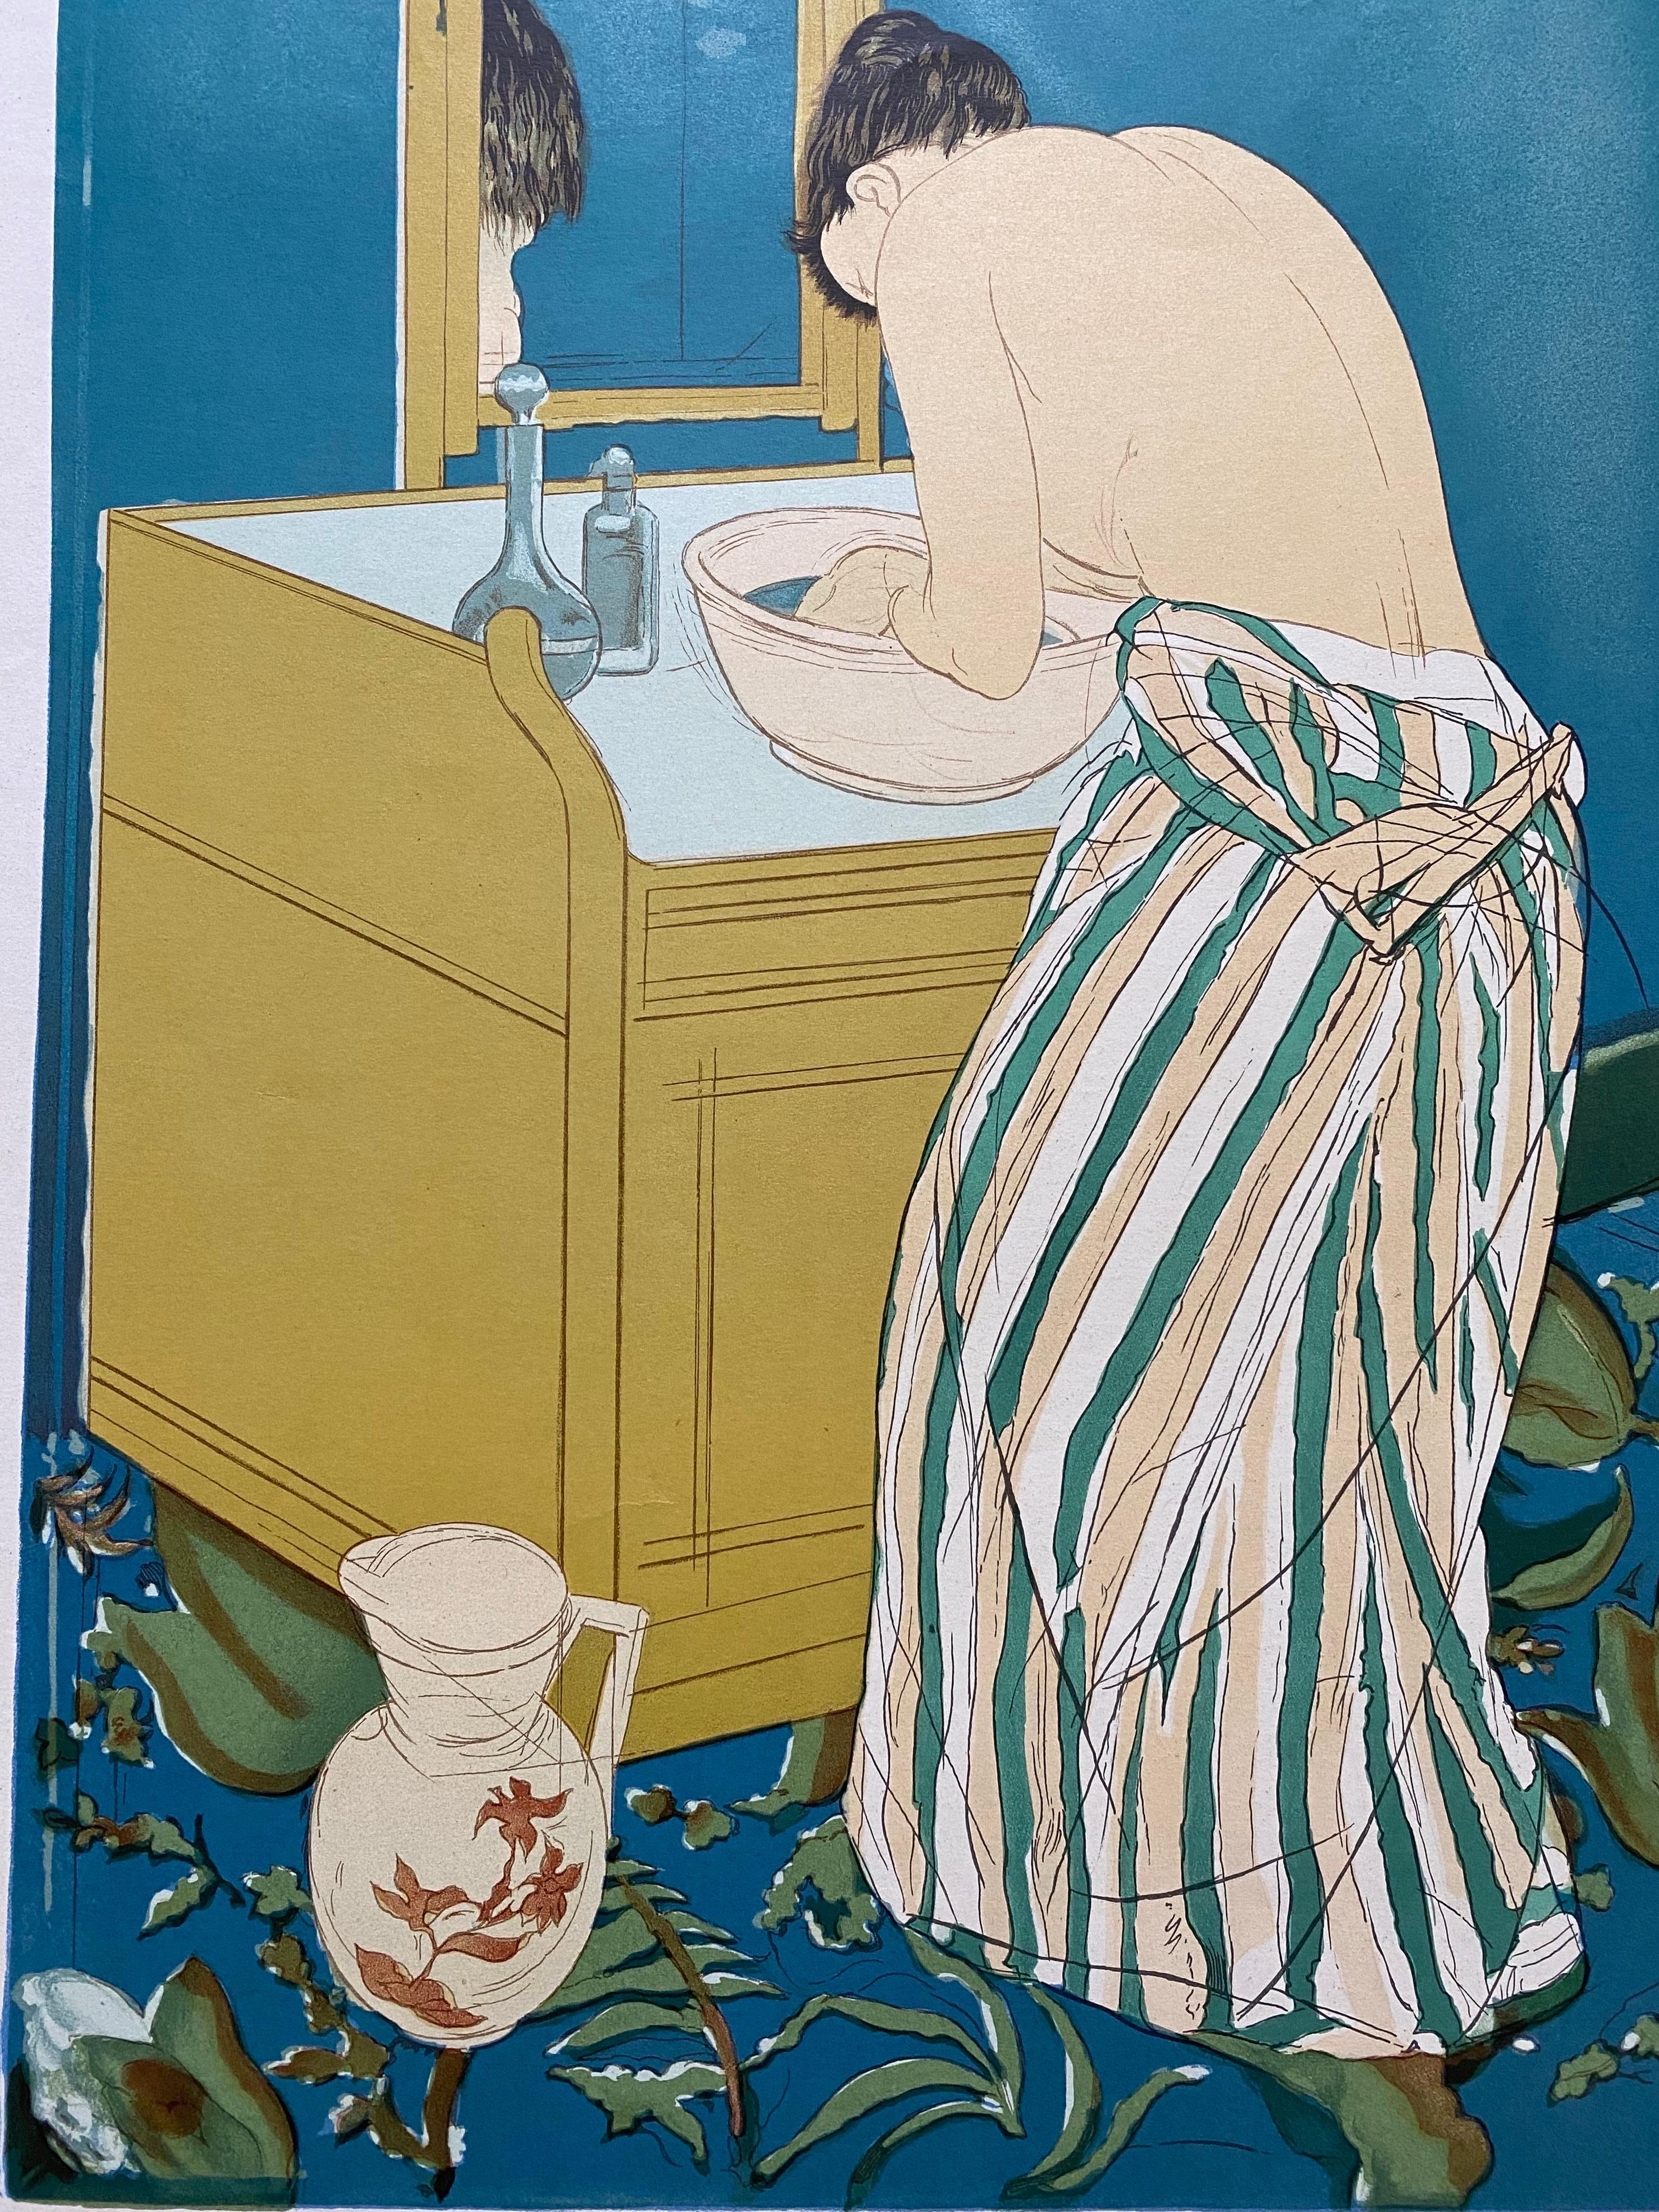 Beautiful lithograph printed by Mourlot in France after Mary Cassatt's 